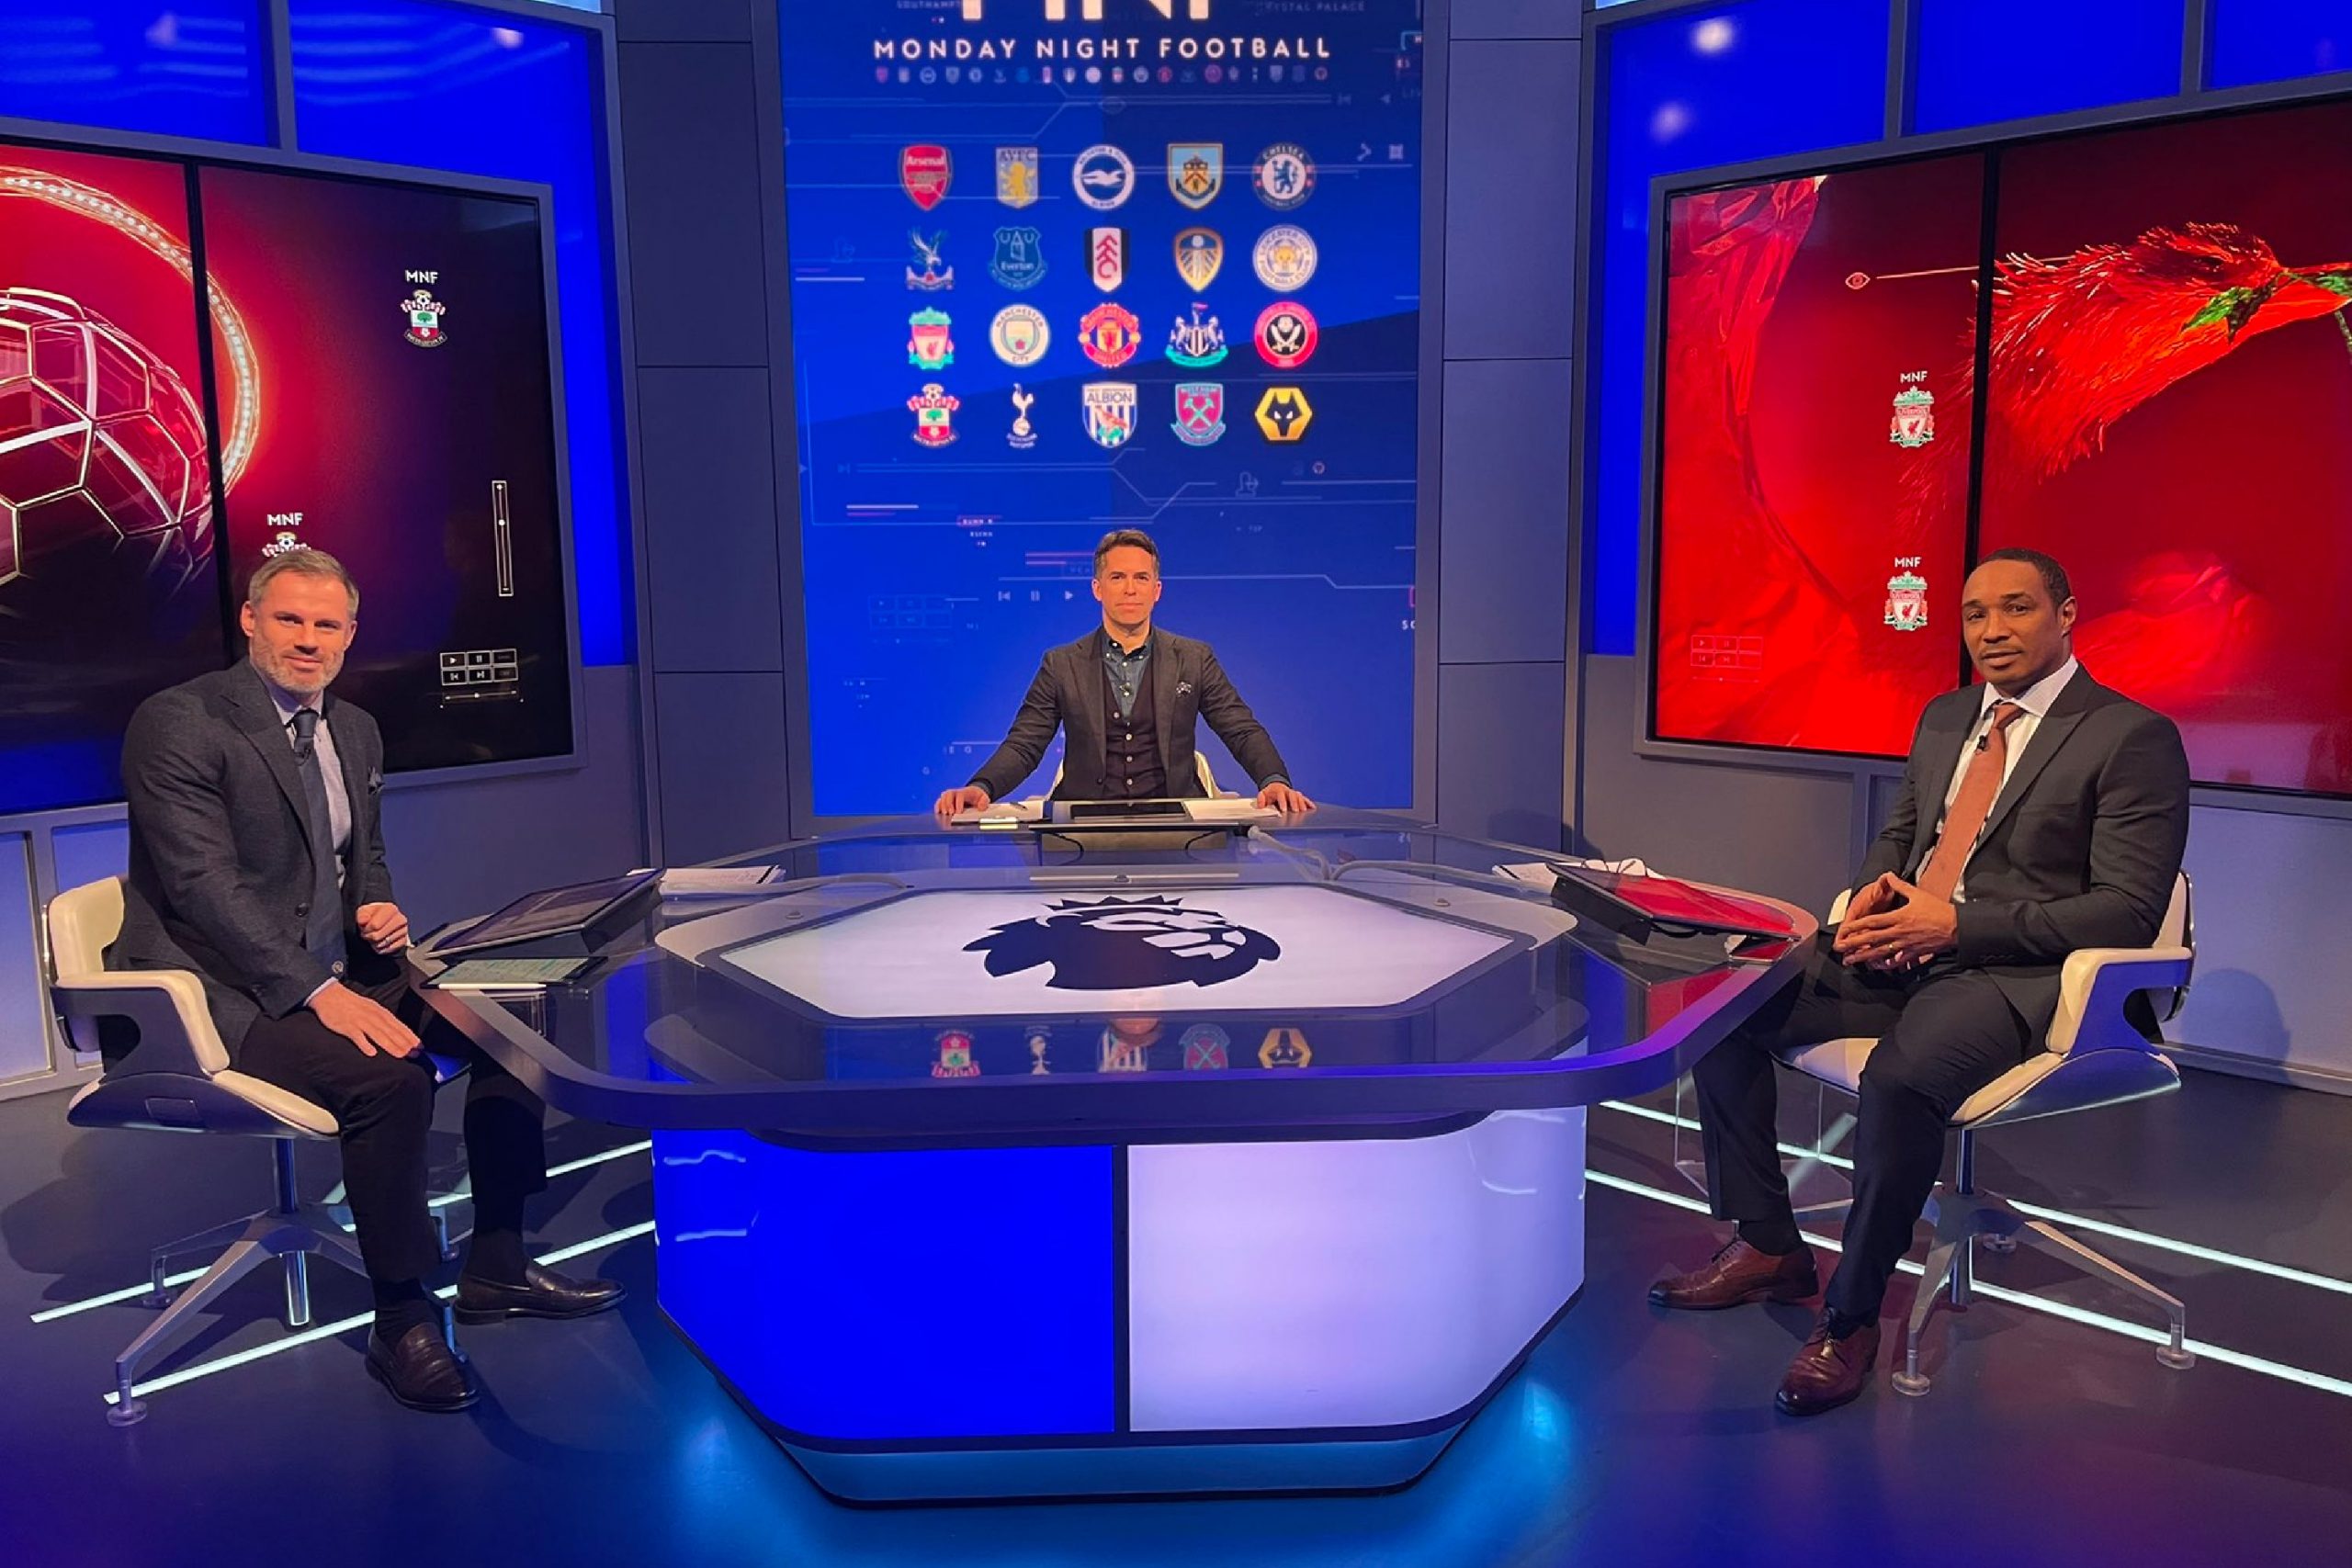 Jamie Carragher, Dave Jones and Paul Ince presenting Monday Night Football